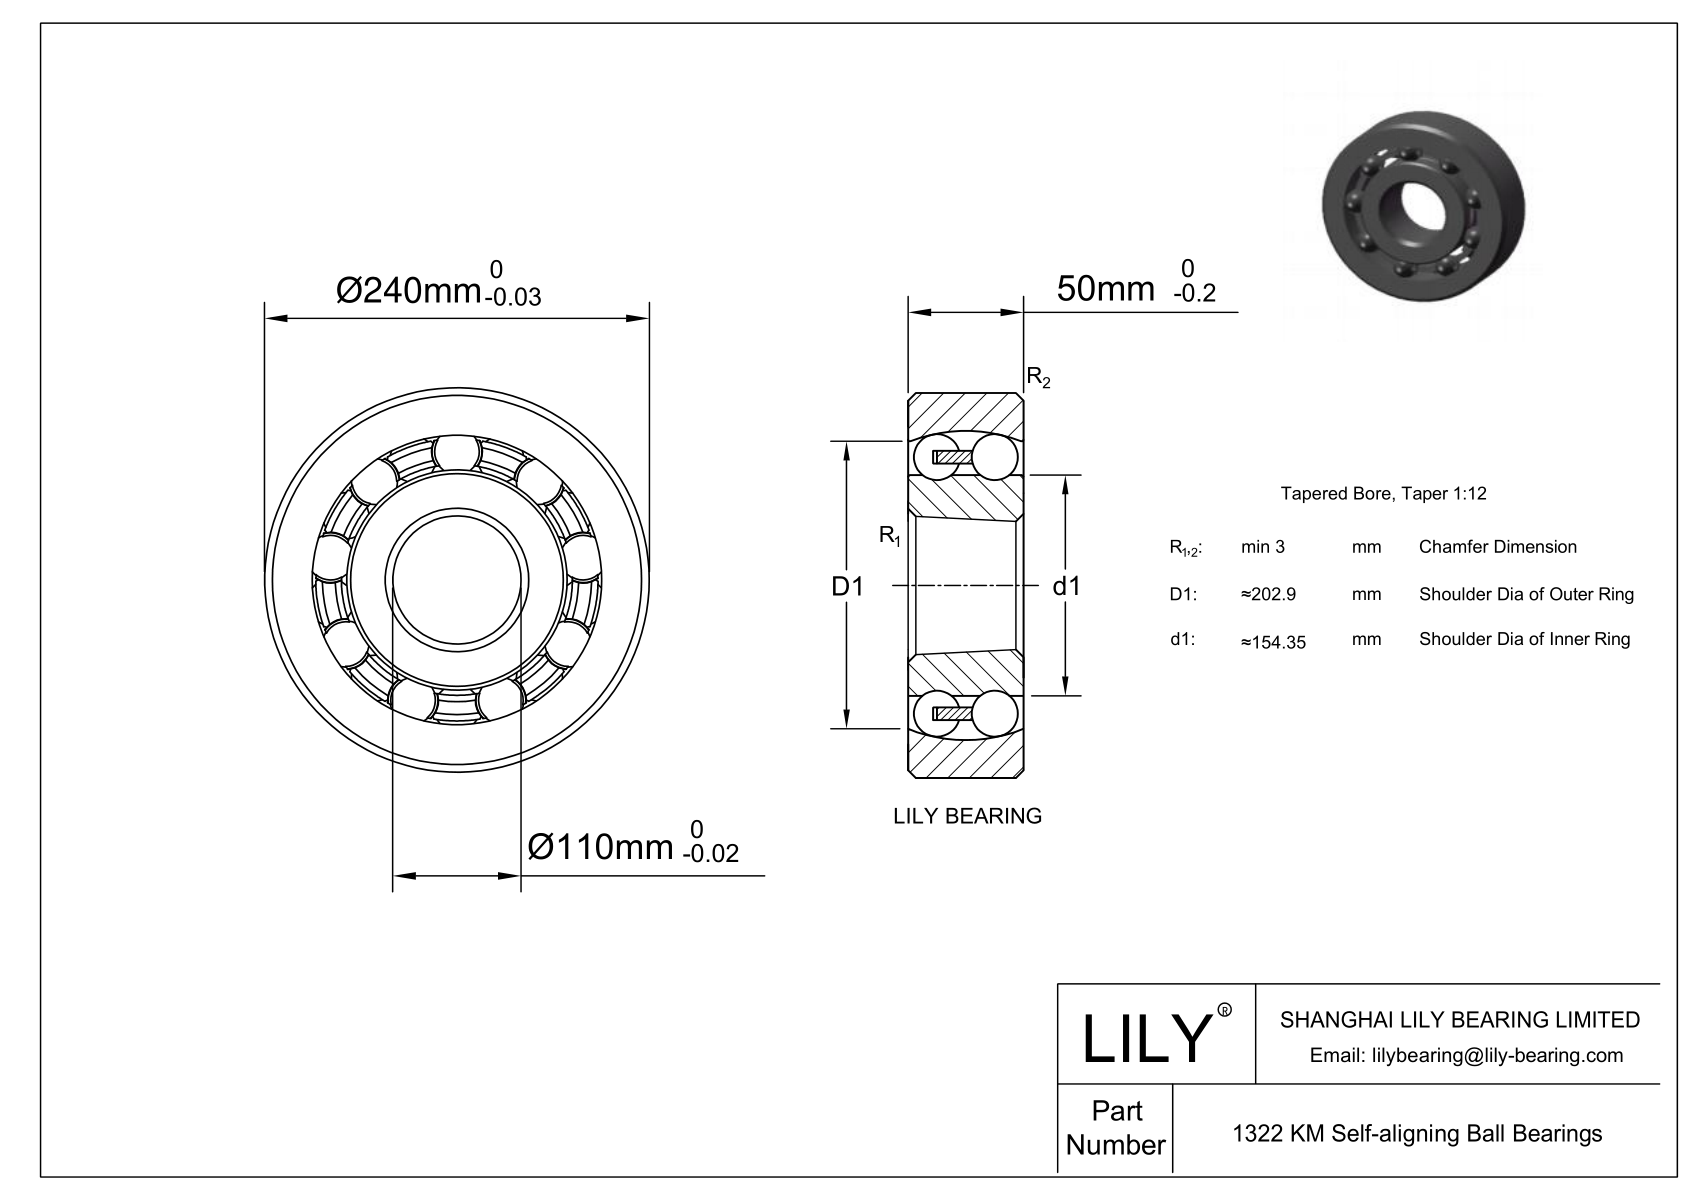 S1322 KM Stainless Steel Self Aligning Ball Bearings cad drawing